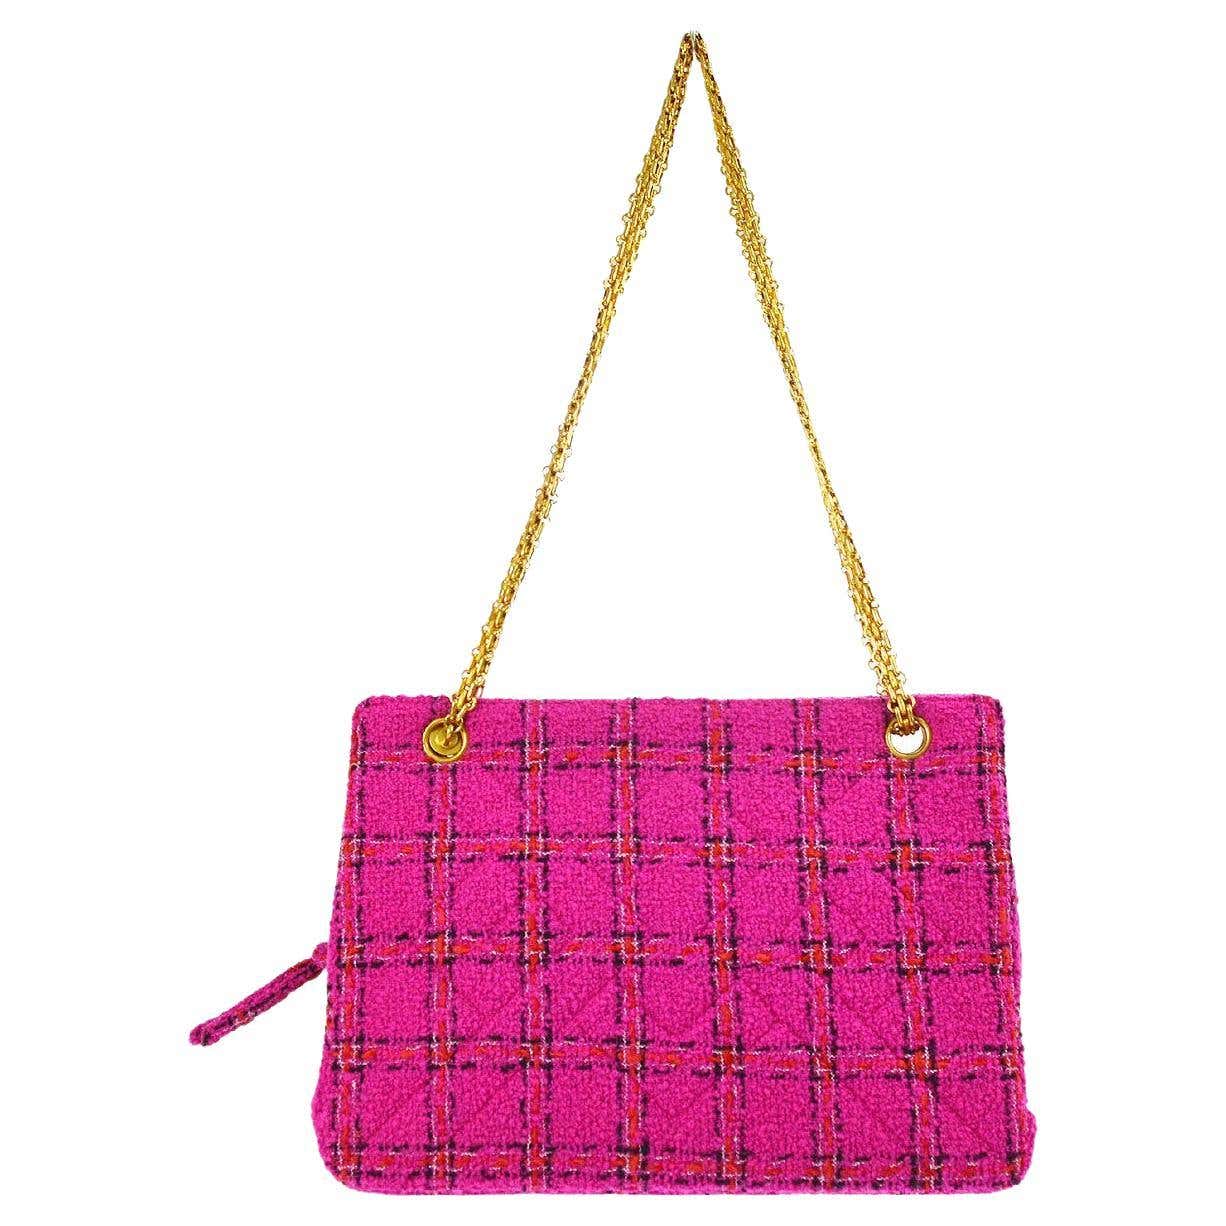 Chanel 90's Vintage 1990's Tweed Pink Classic Reissue Tote Bag For Sale ...